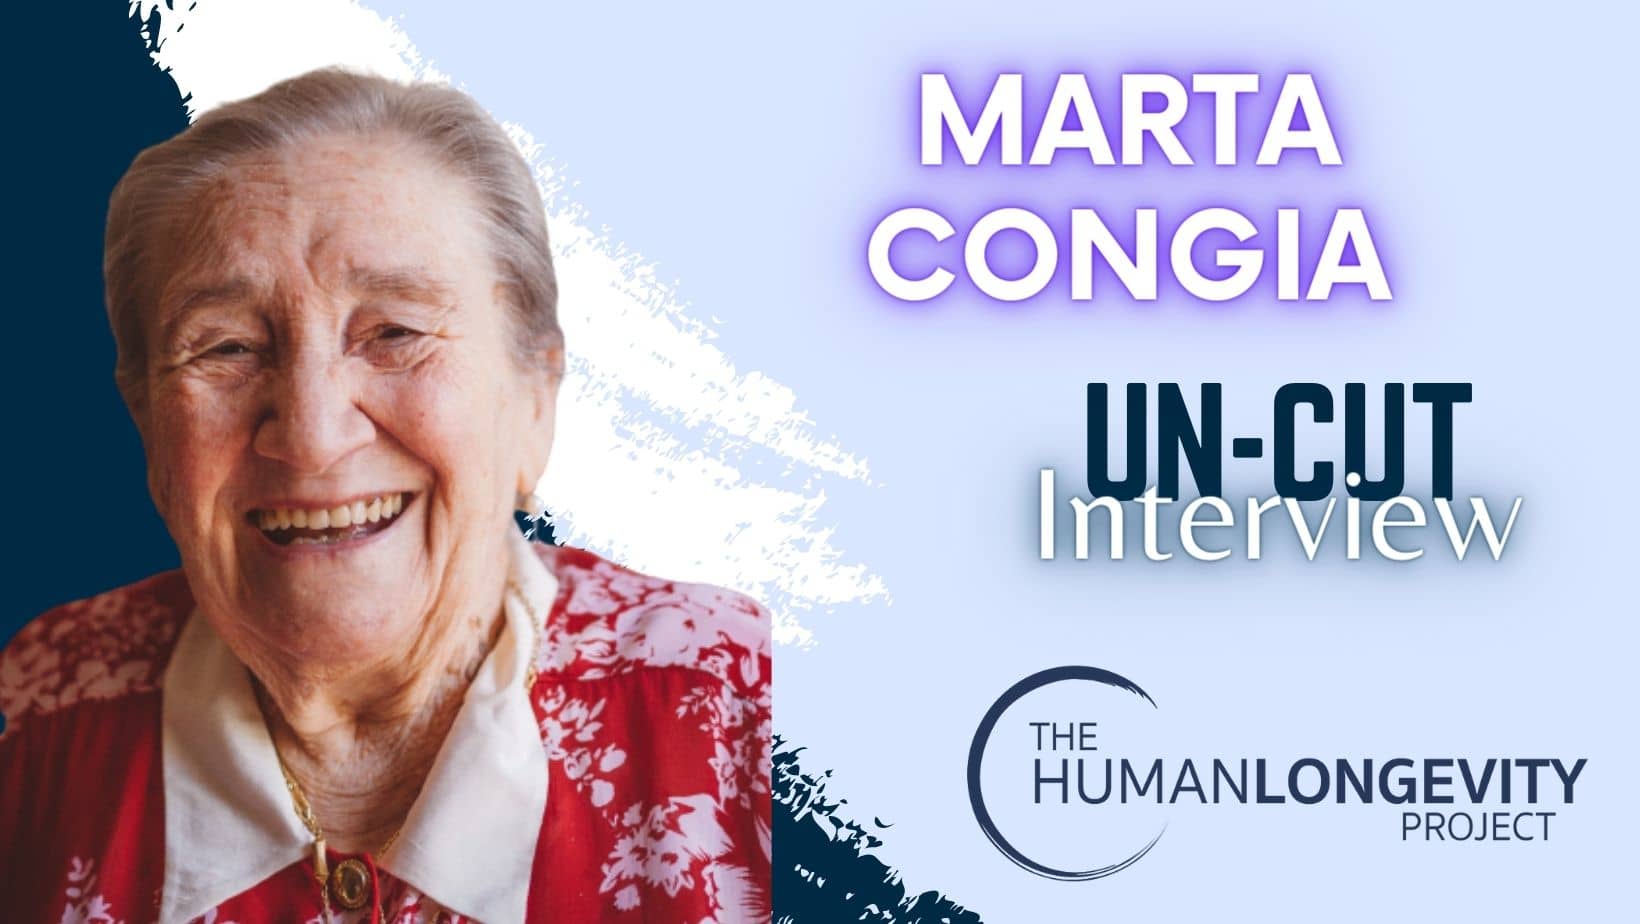 Human Longevity Project Uncut Interview With Marta Congia